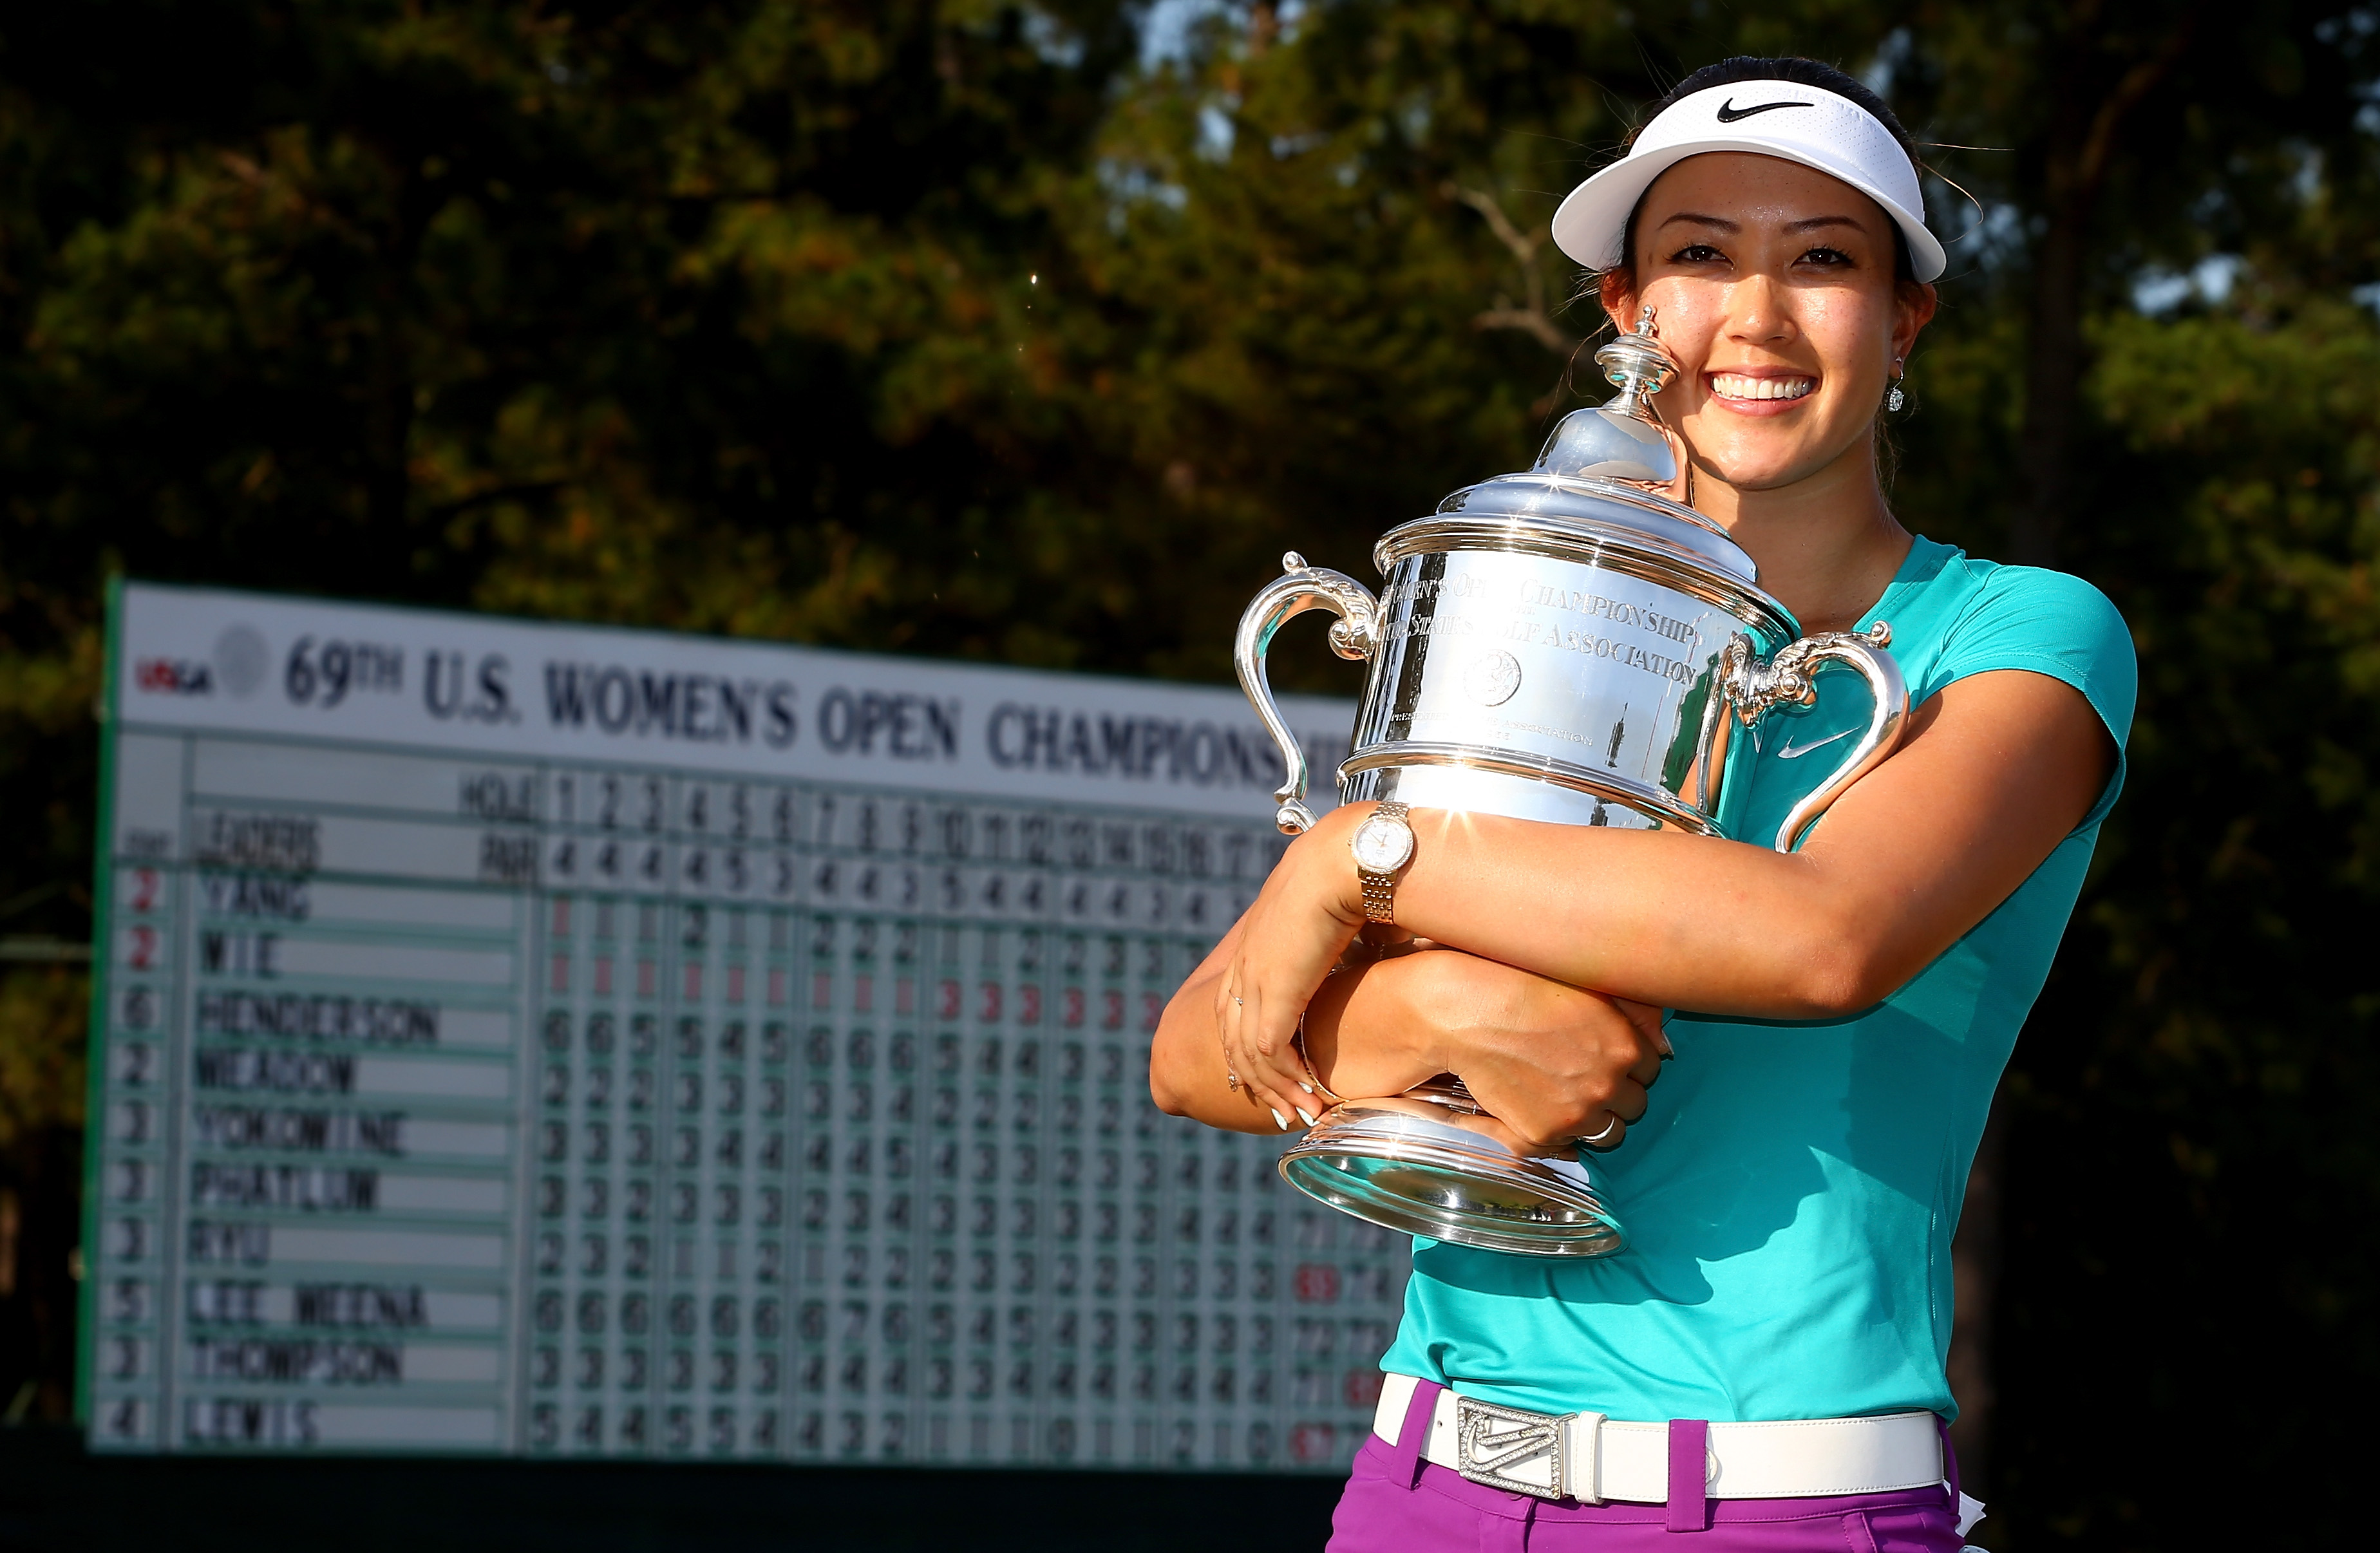 Michelle Wie West Plays Final Round As Professional At US Women's Open ...